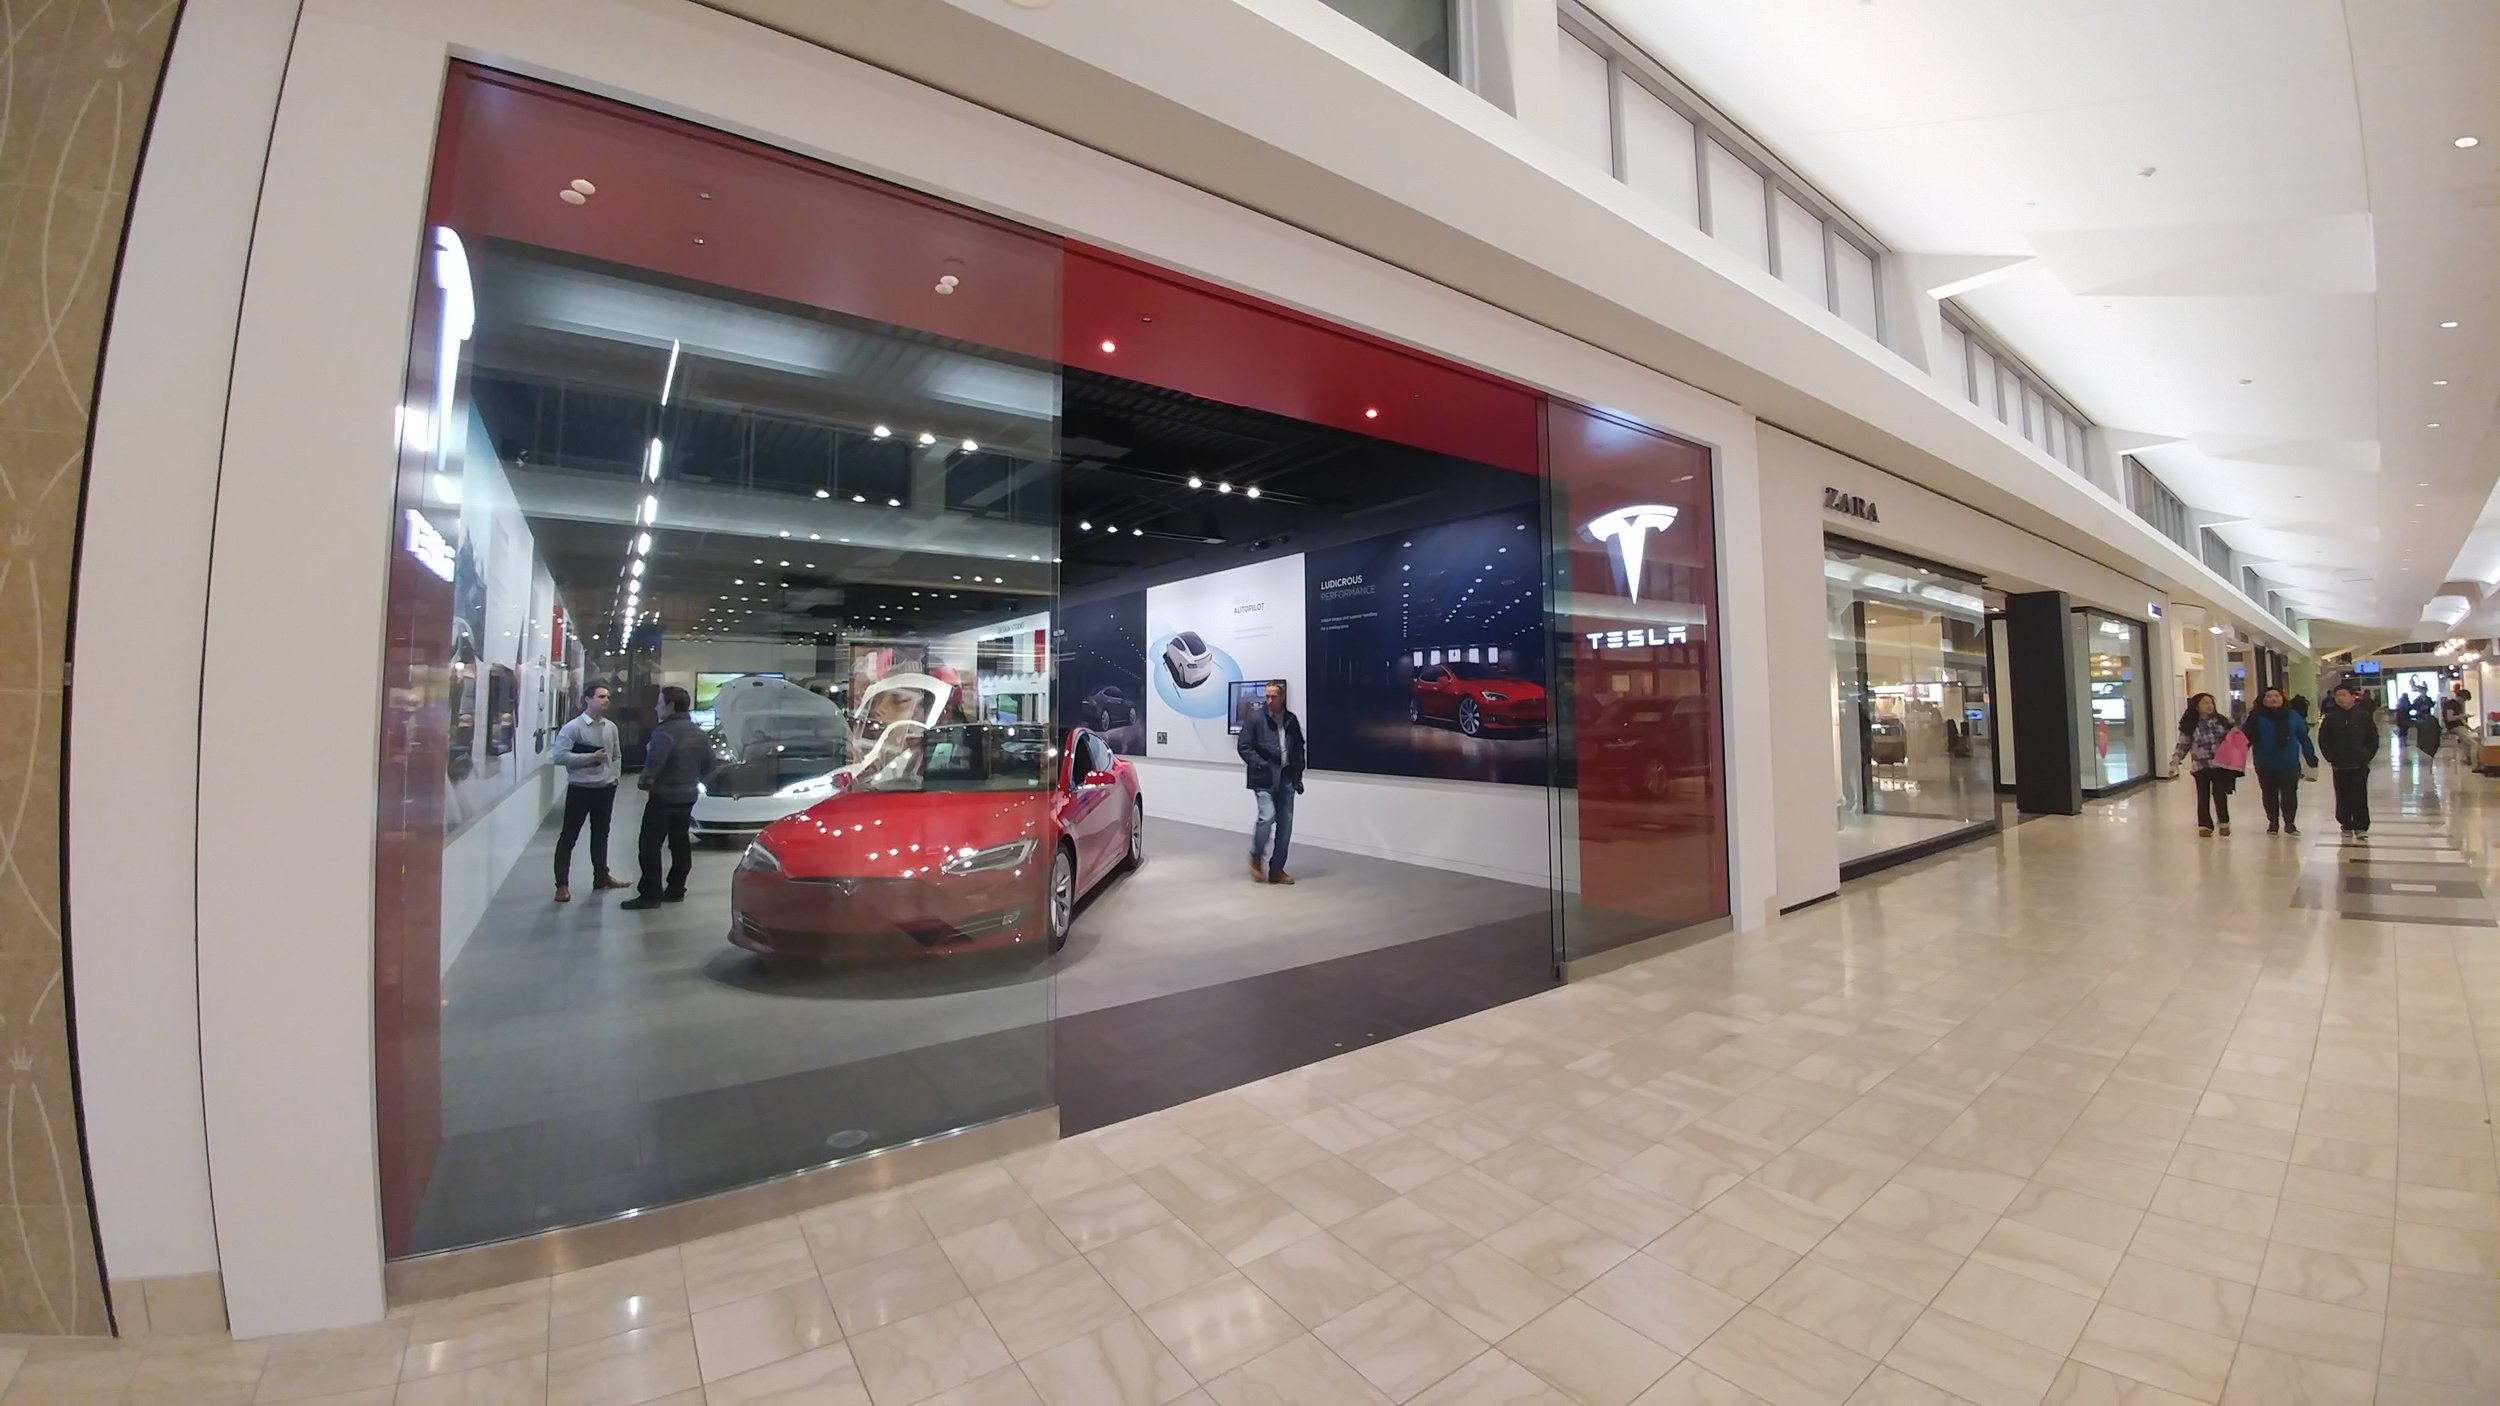 Tesla Opens Car Gallery At Mall — Long 